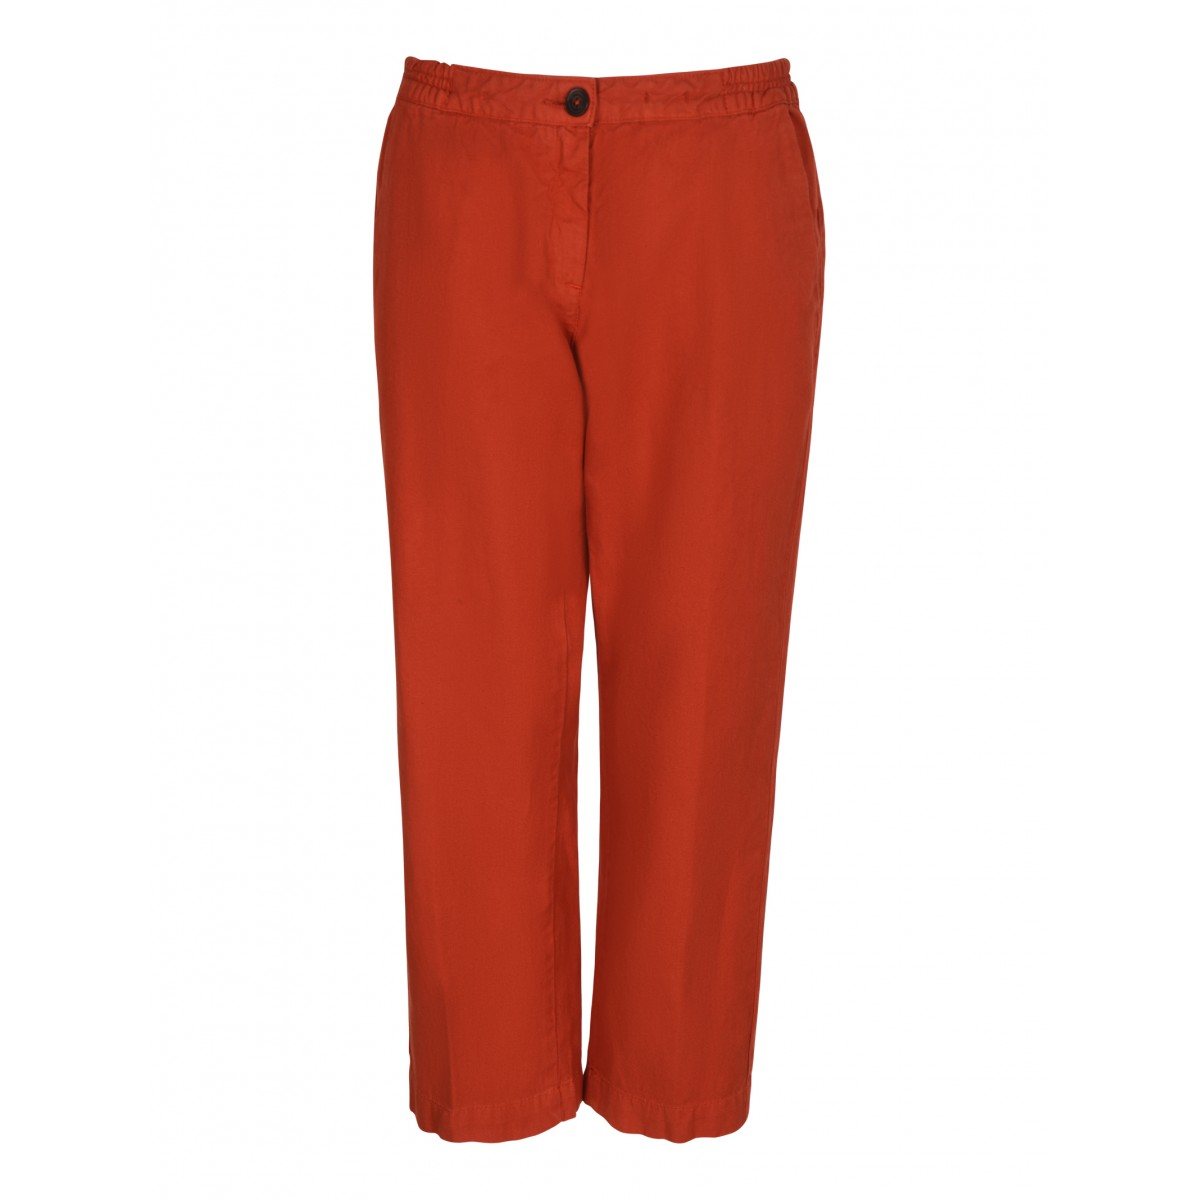 Red cotton and Linen Cropped Pants